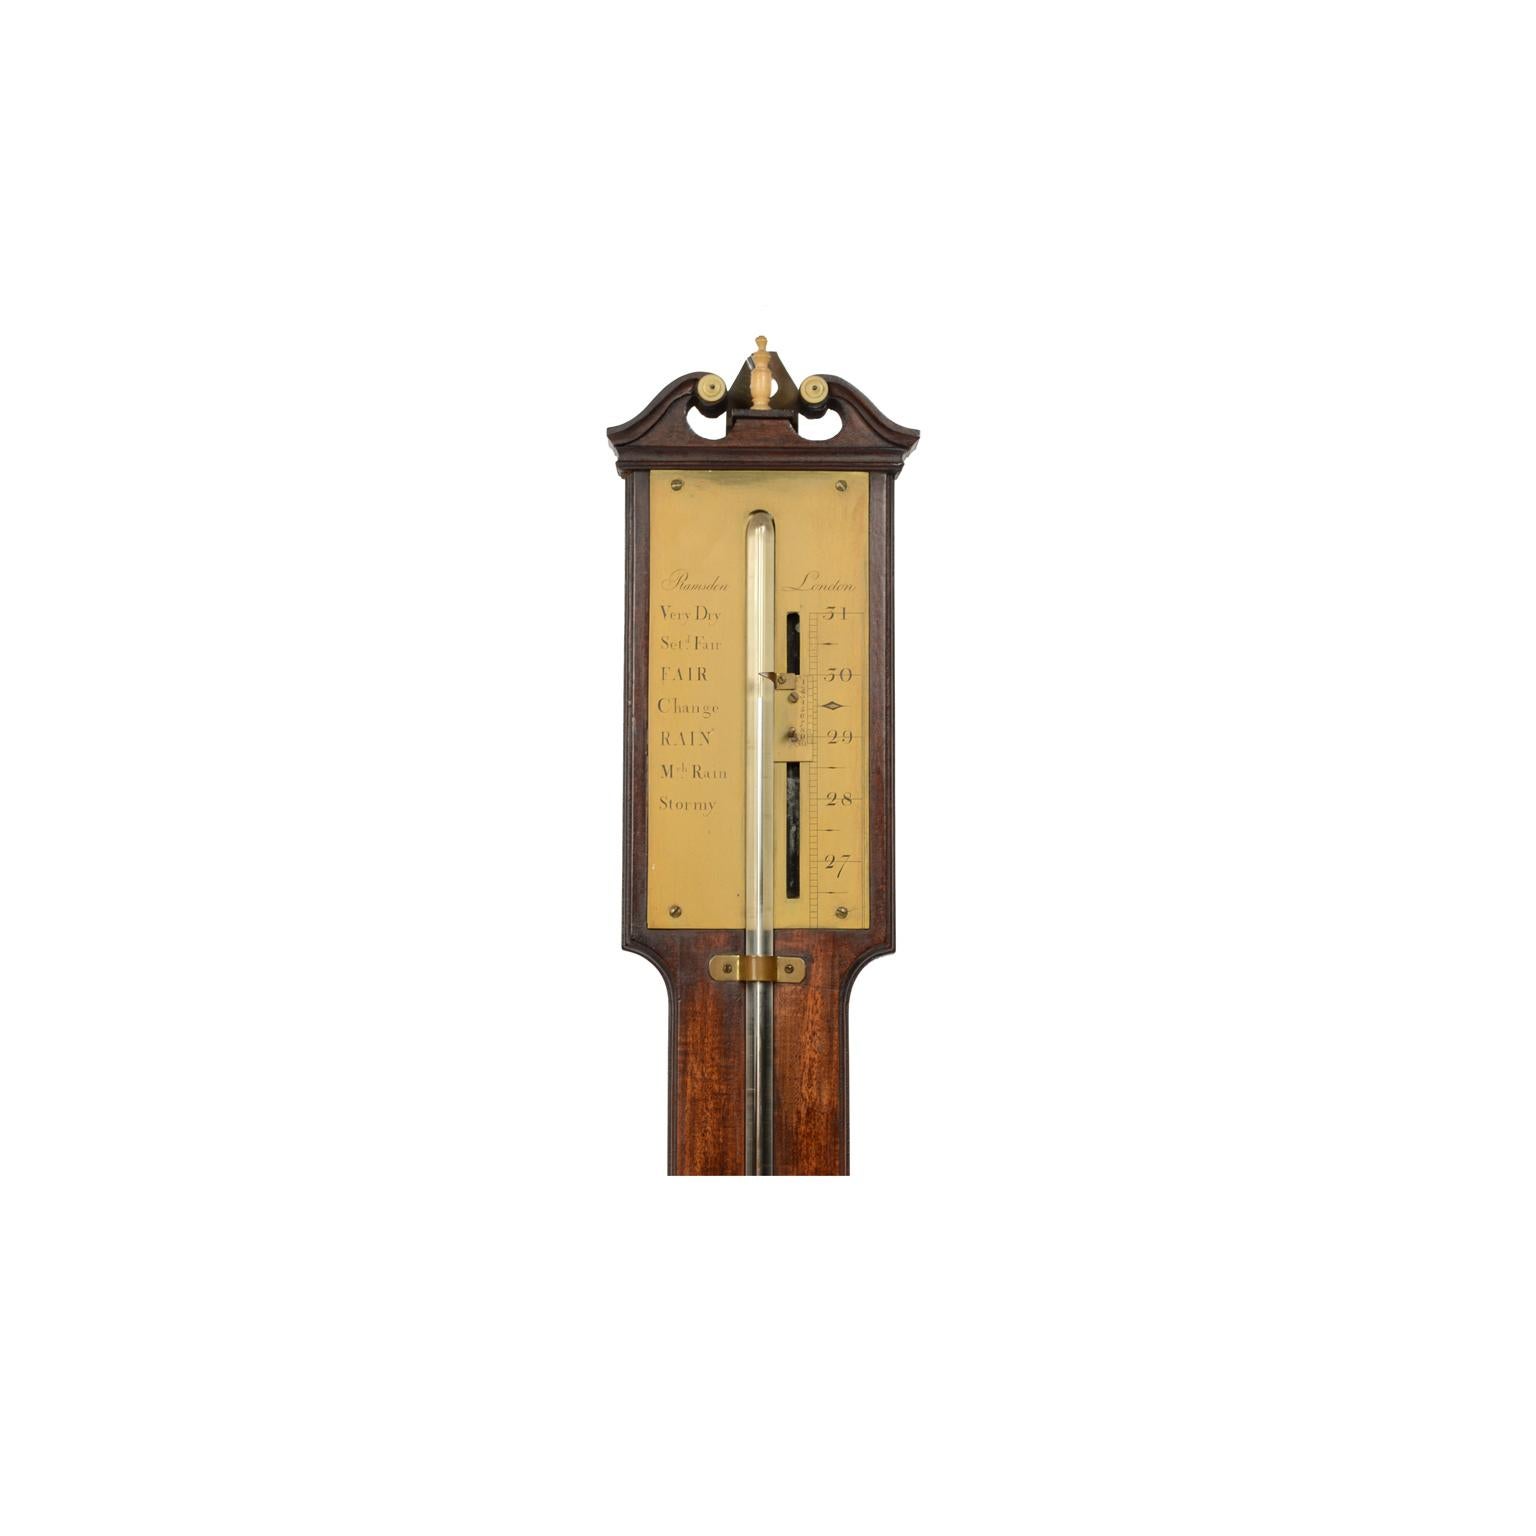 Stick barometer mounted on a mahogany board complete with vernier reading the variation of atmospheric pressure signed by Jesse Ramsden, end of the 18th century. 
Very good condition, fully functional. Height 100 cm.
For safety during transport the